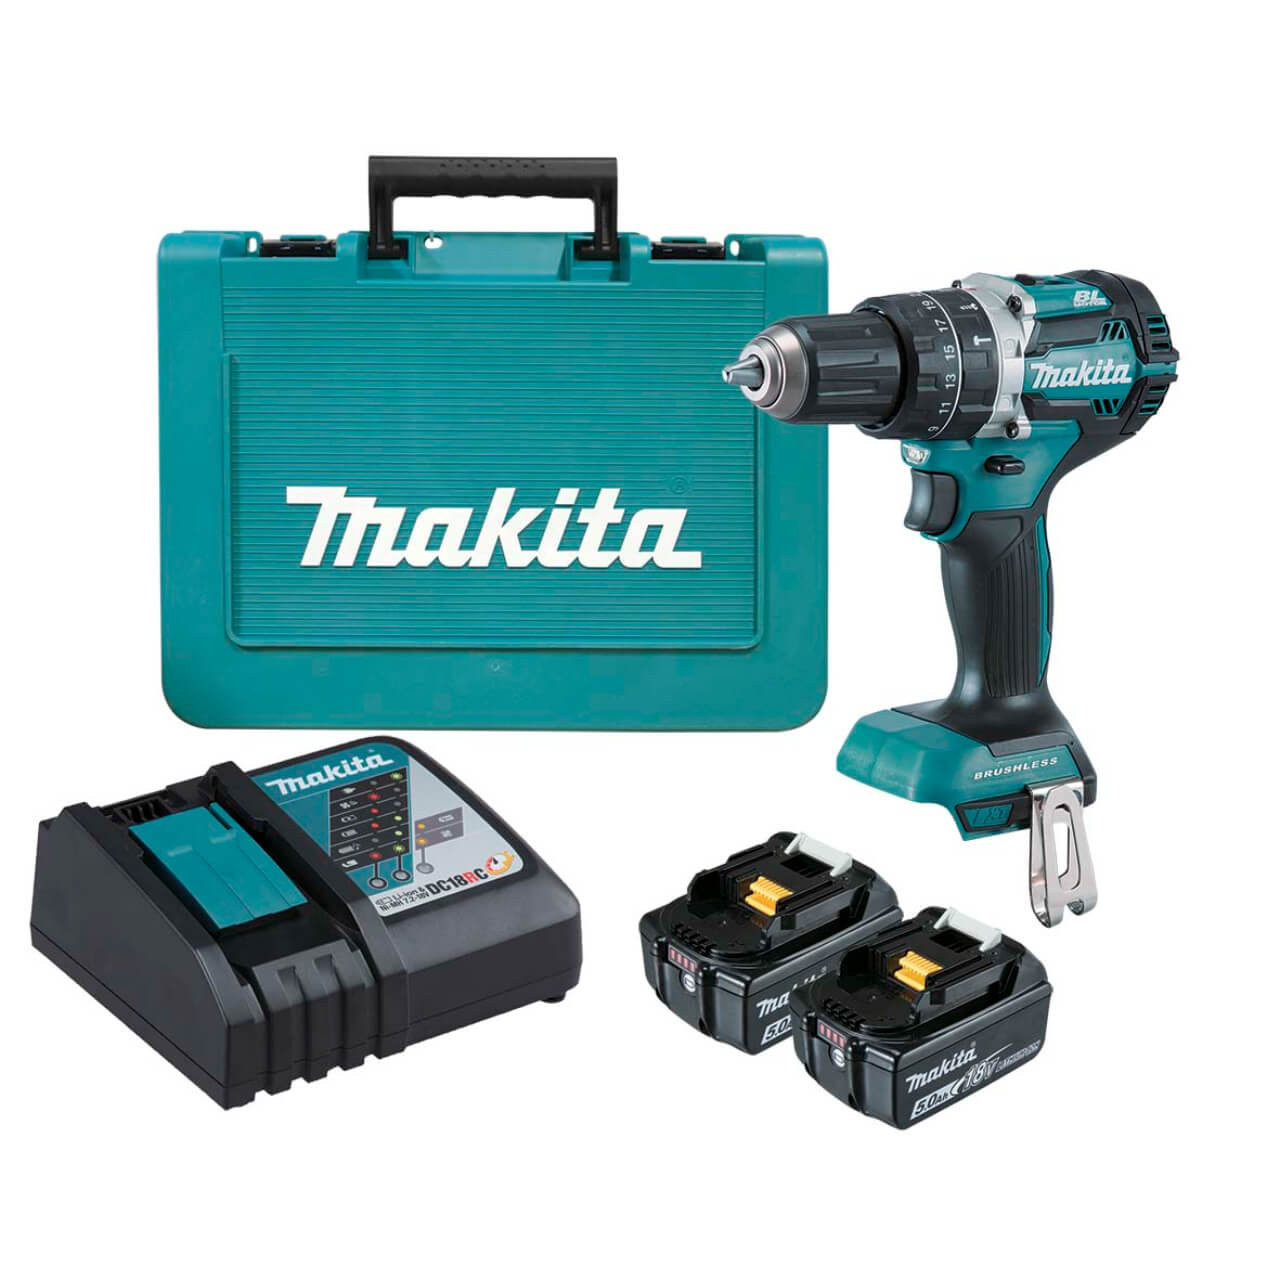 Makita 18V COMPACT BRUSHLESS Heavy Duty Hammer Driver Drill Kit - Includes 2 x 5.0Ah Batteries. Rapid Charger & Carry Case